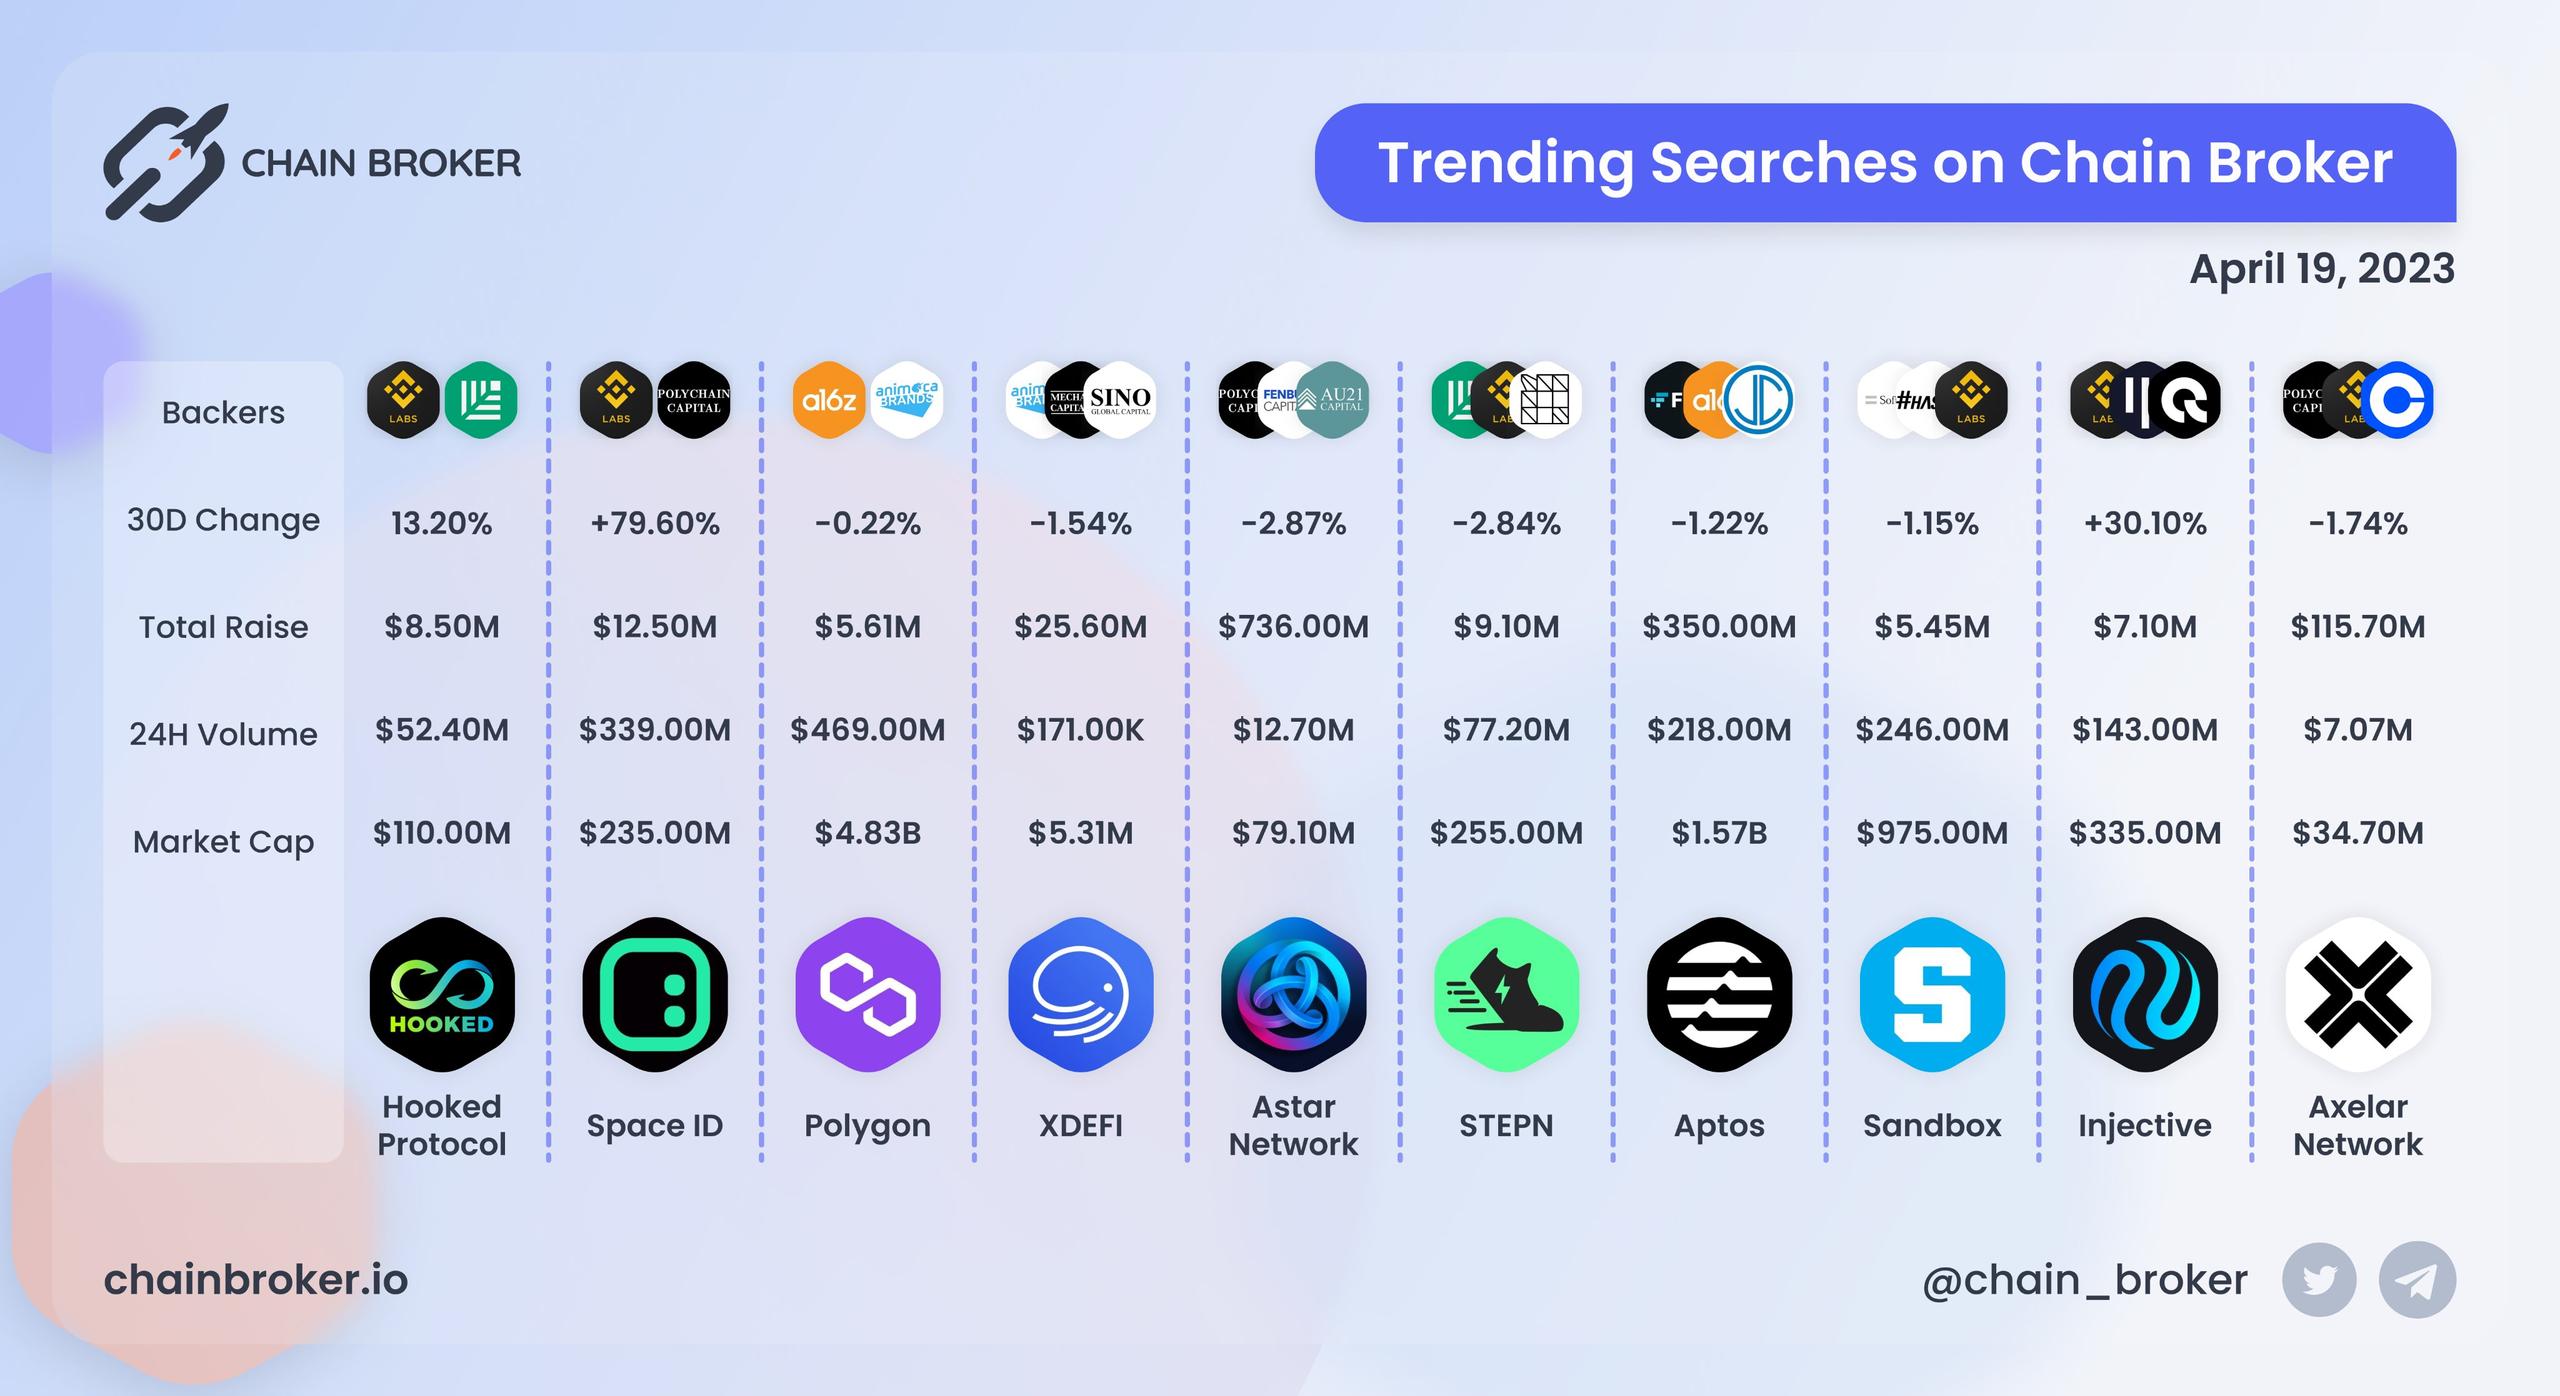 Trending Searches on Chain Broker